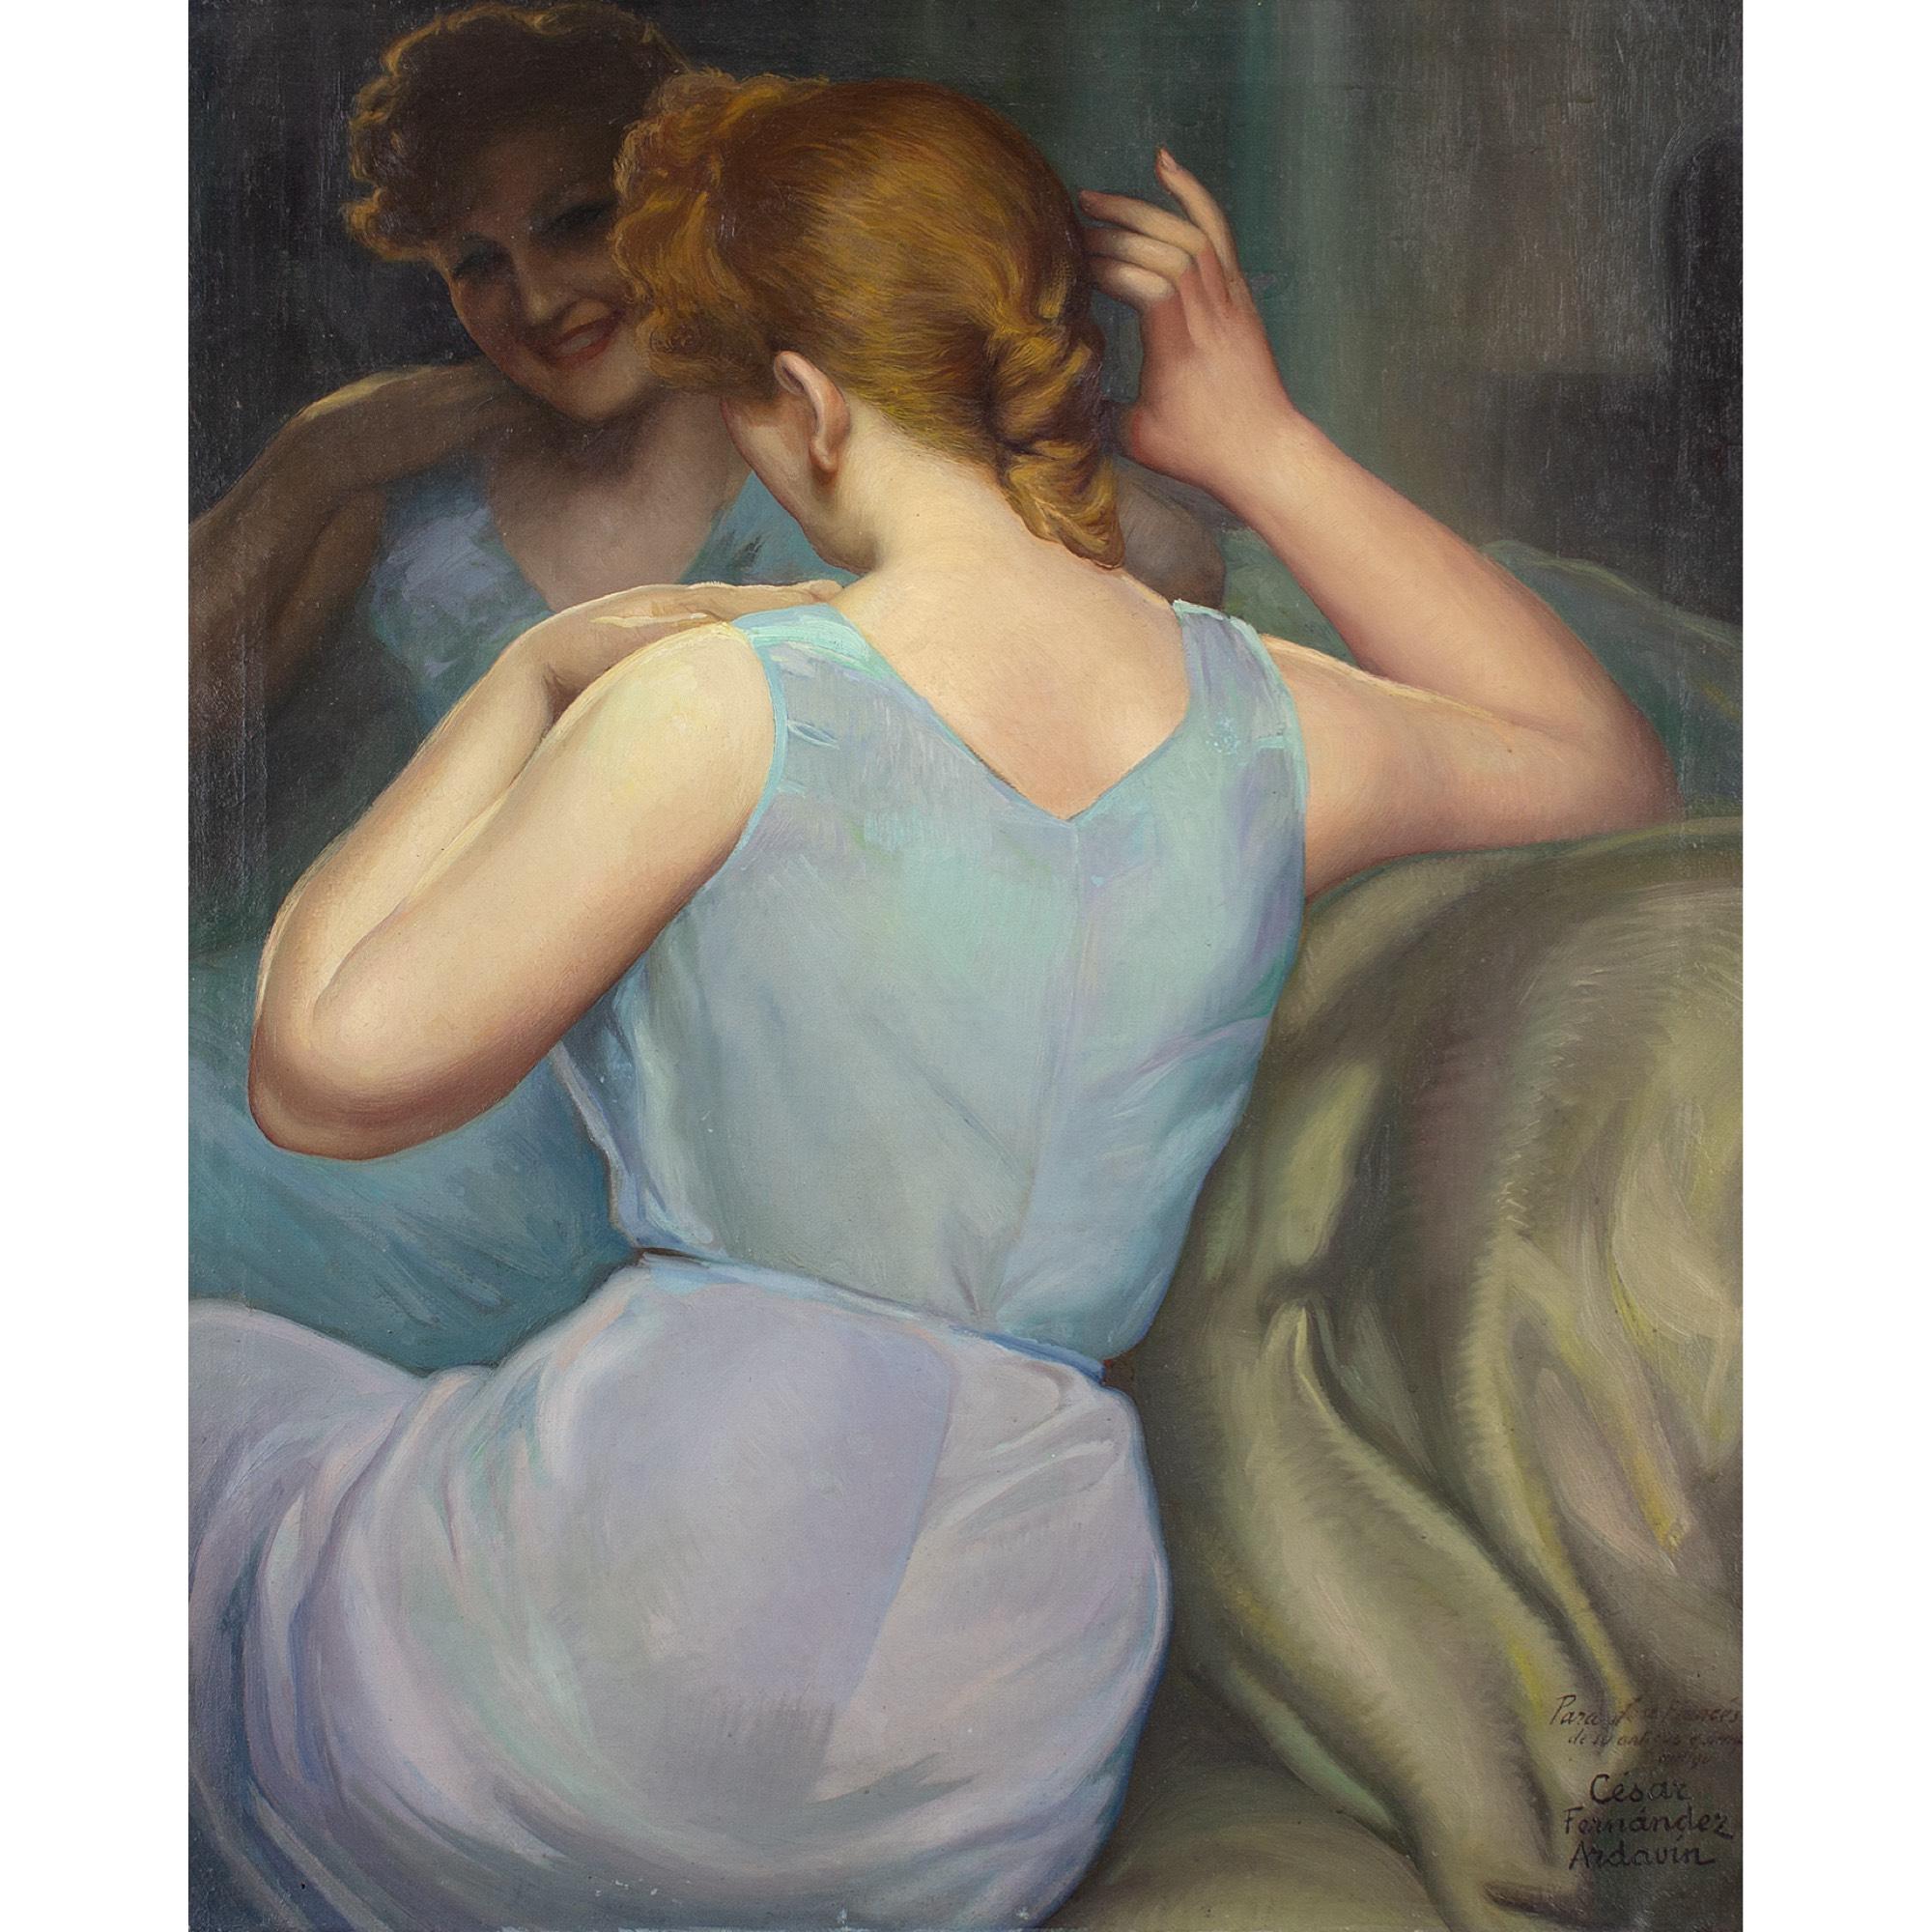 This early 20th-century oil painting by Spanish artist César Fernández Ardavín (1883-1974) depicts a cheerful young woman before a mirror.

Buoyant and playful, she sits casually on a chaise lounge. Her effervescent smile reflected in a mirror. She